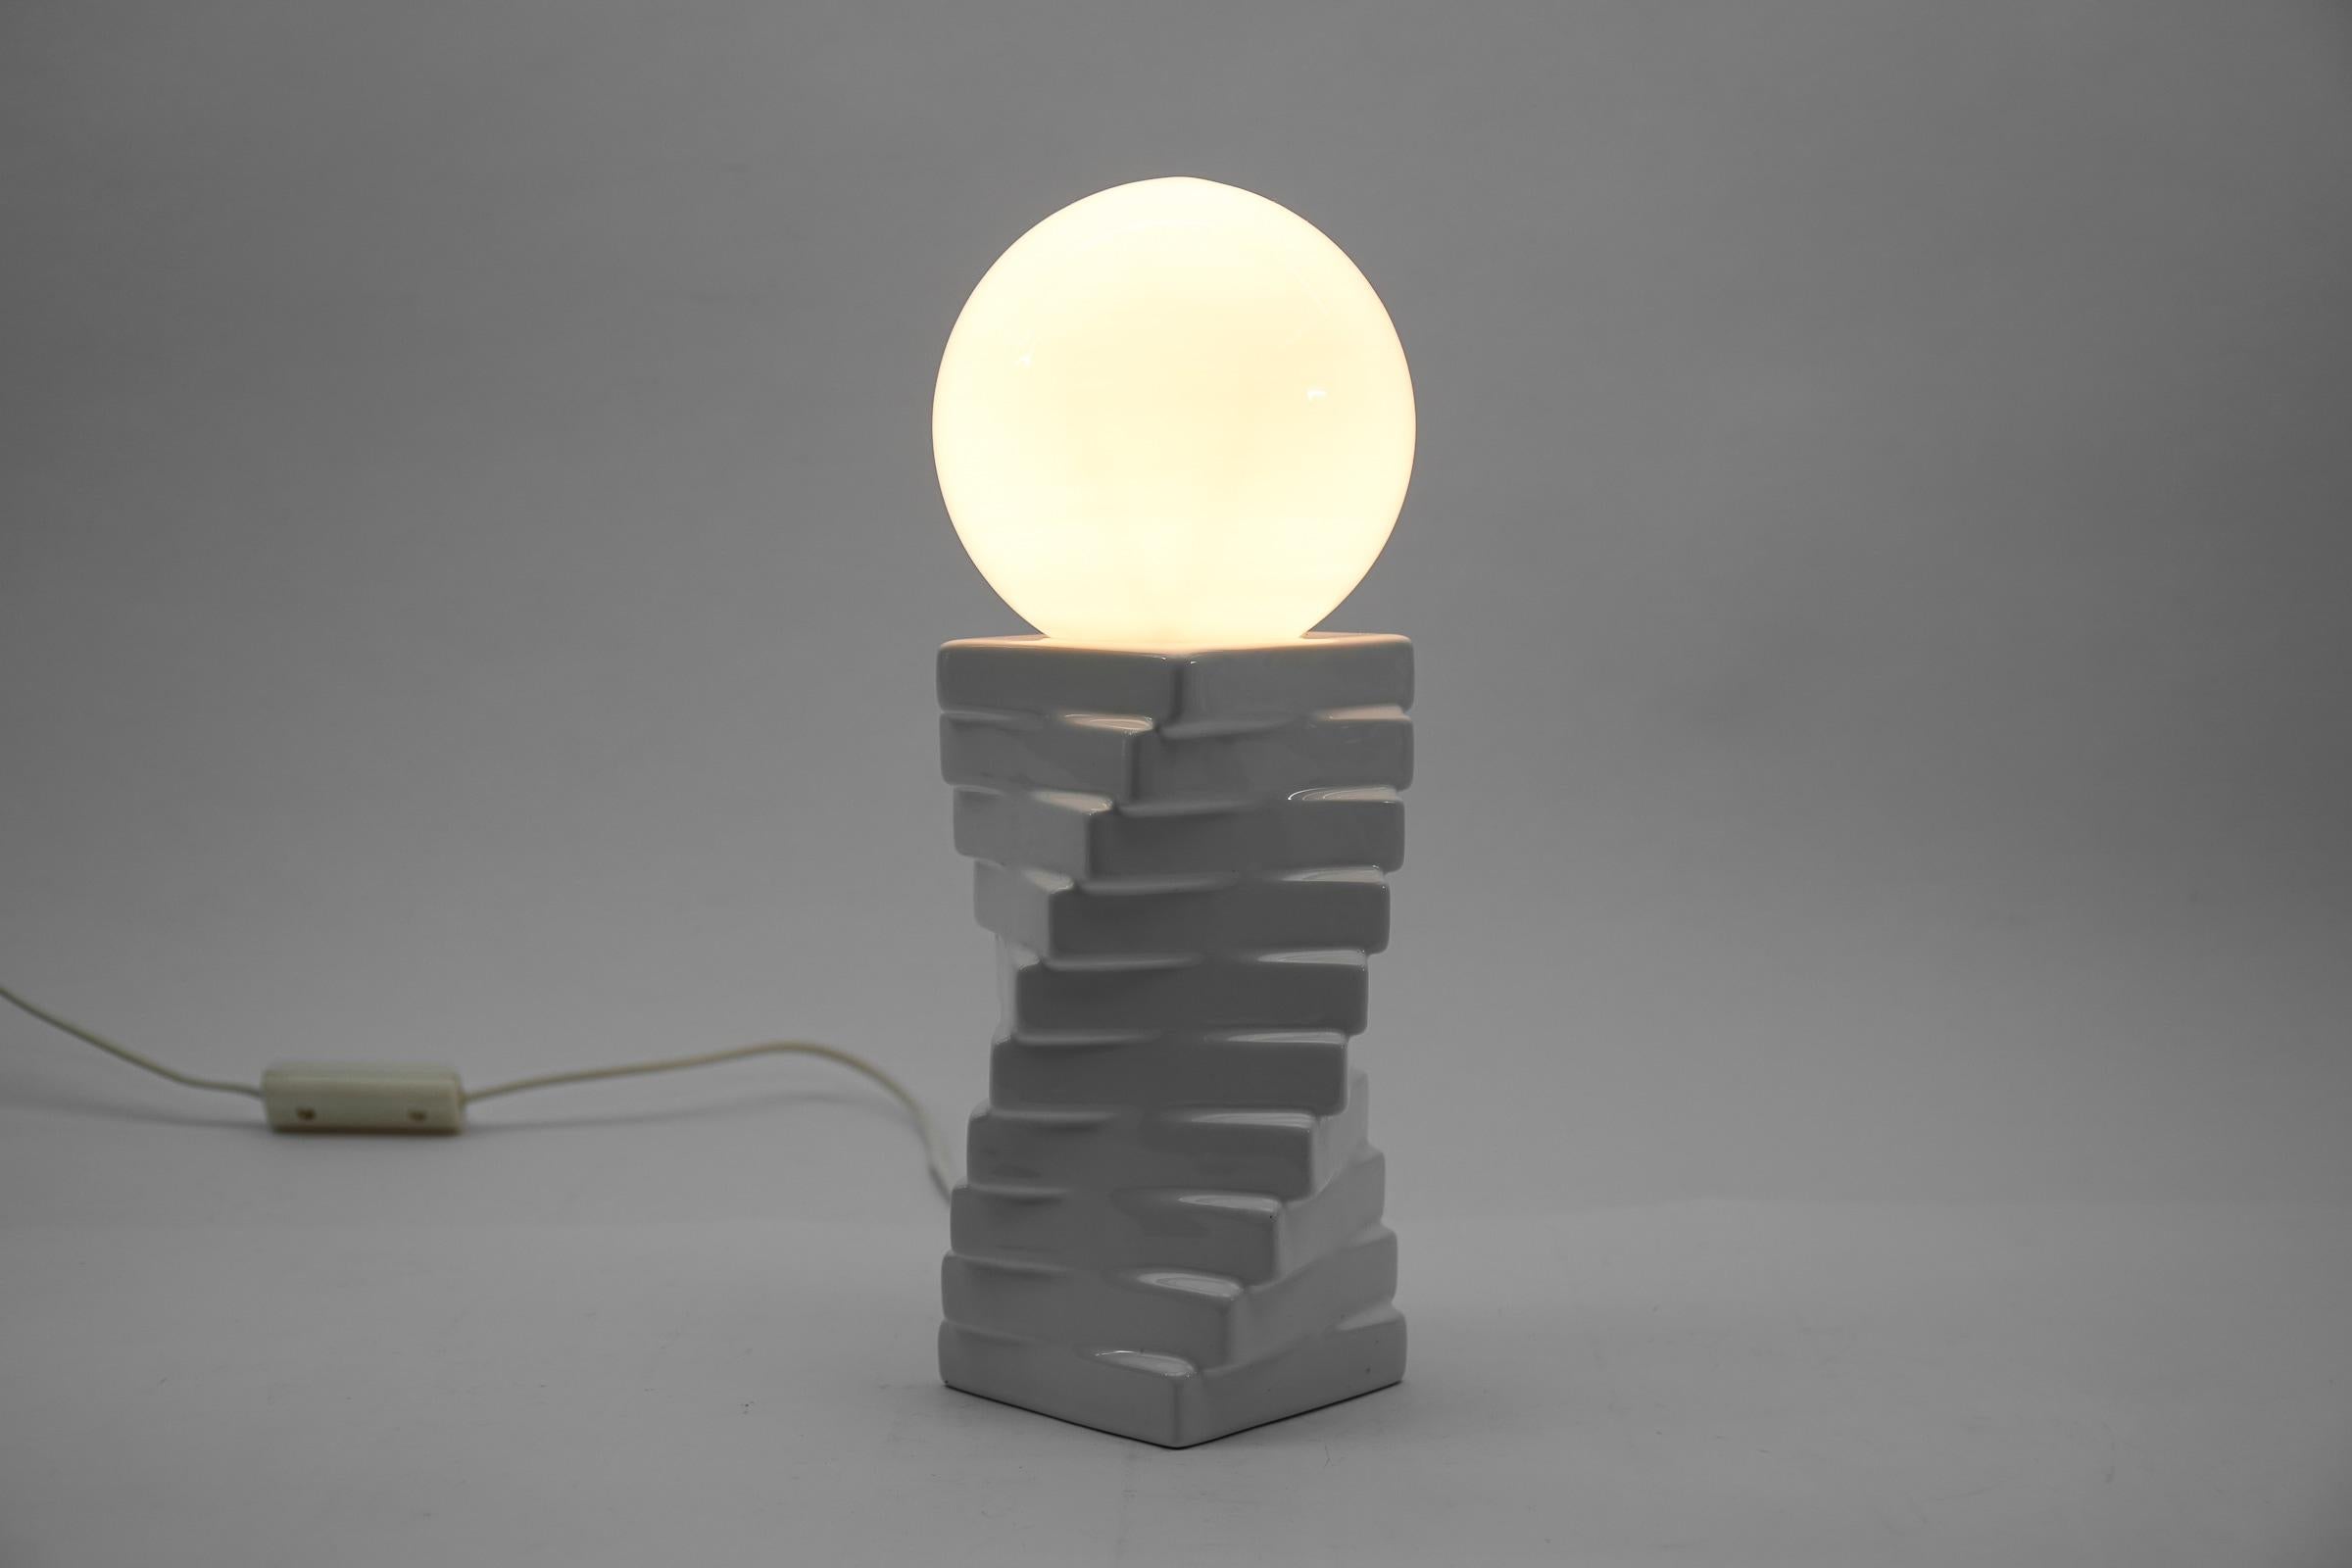 Mid-20th Century Italian Ceramic Table Lamp with a Milk Glass Ball Shade, 1960s For Sale